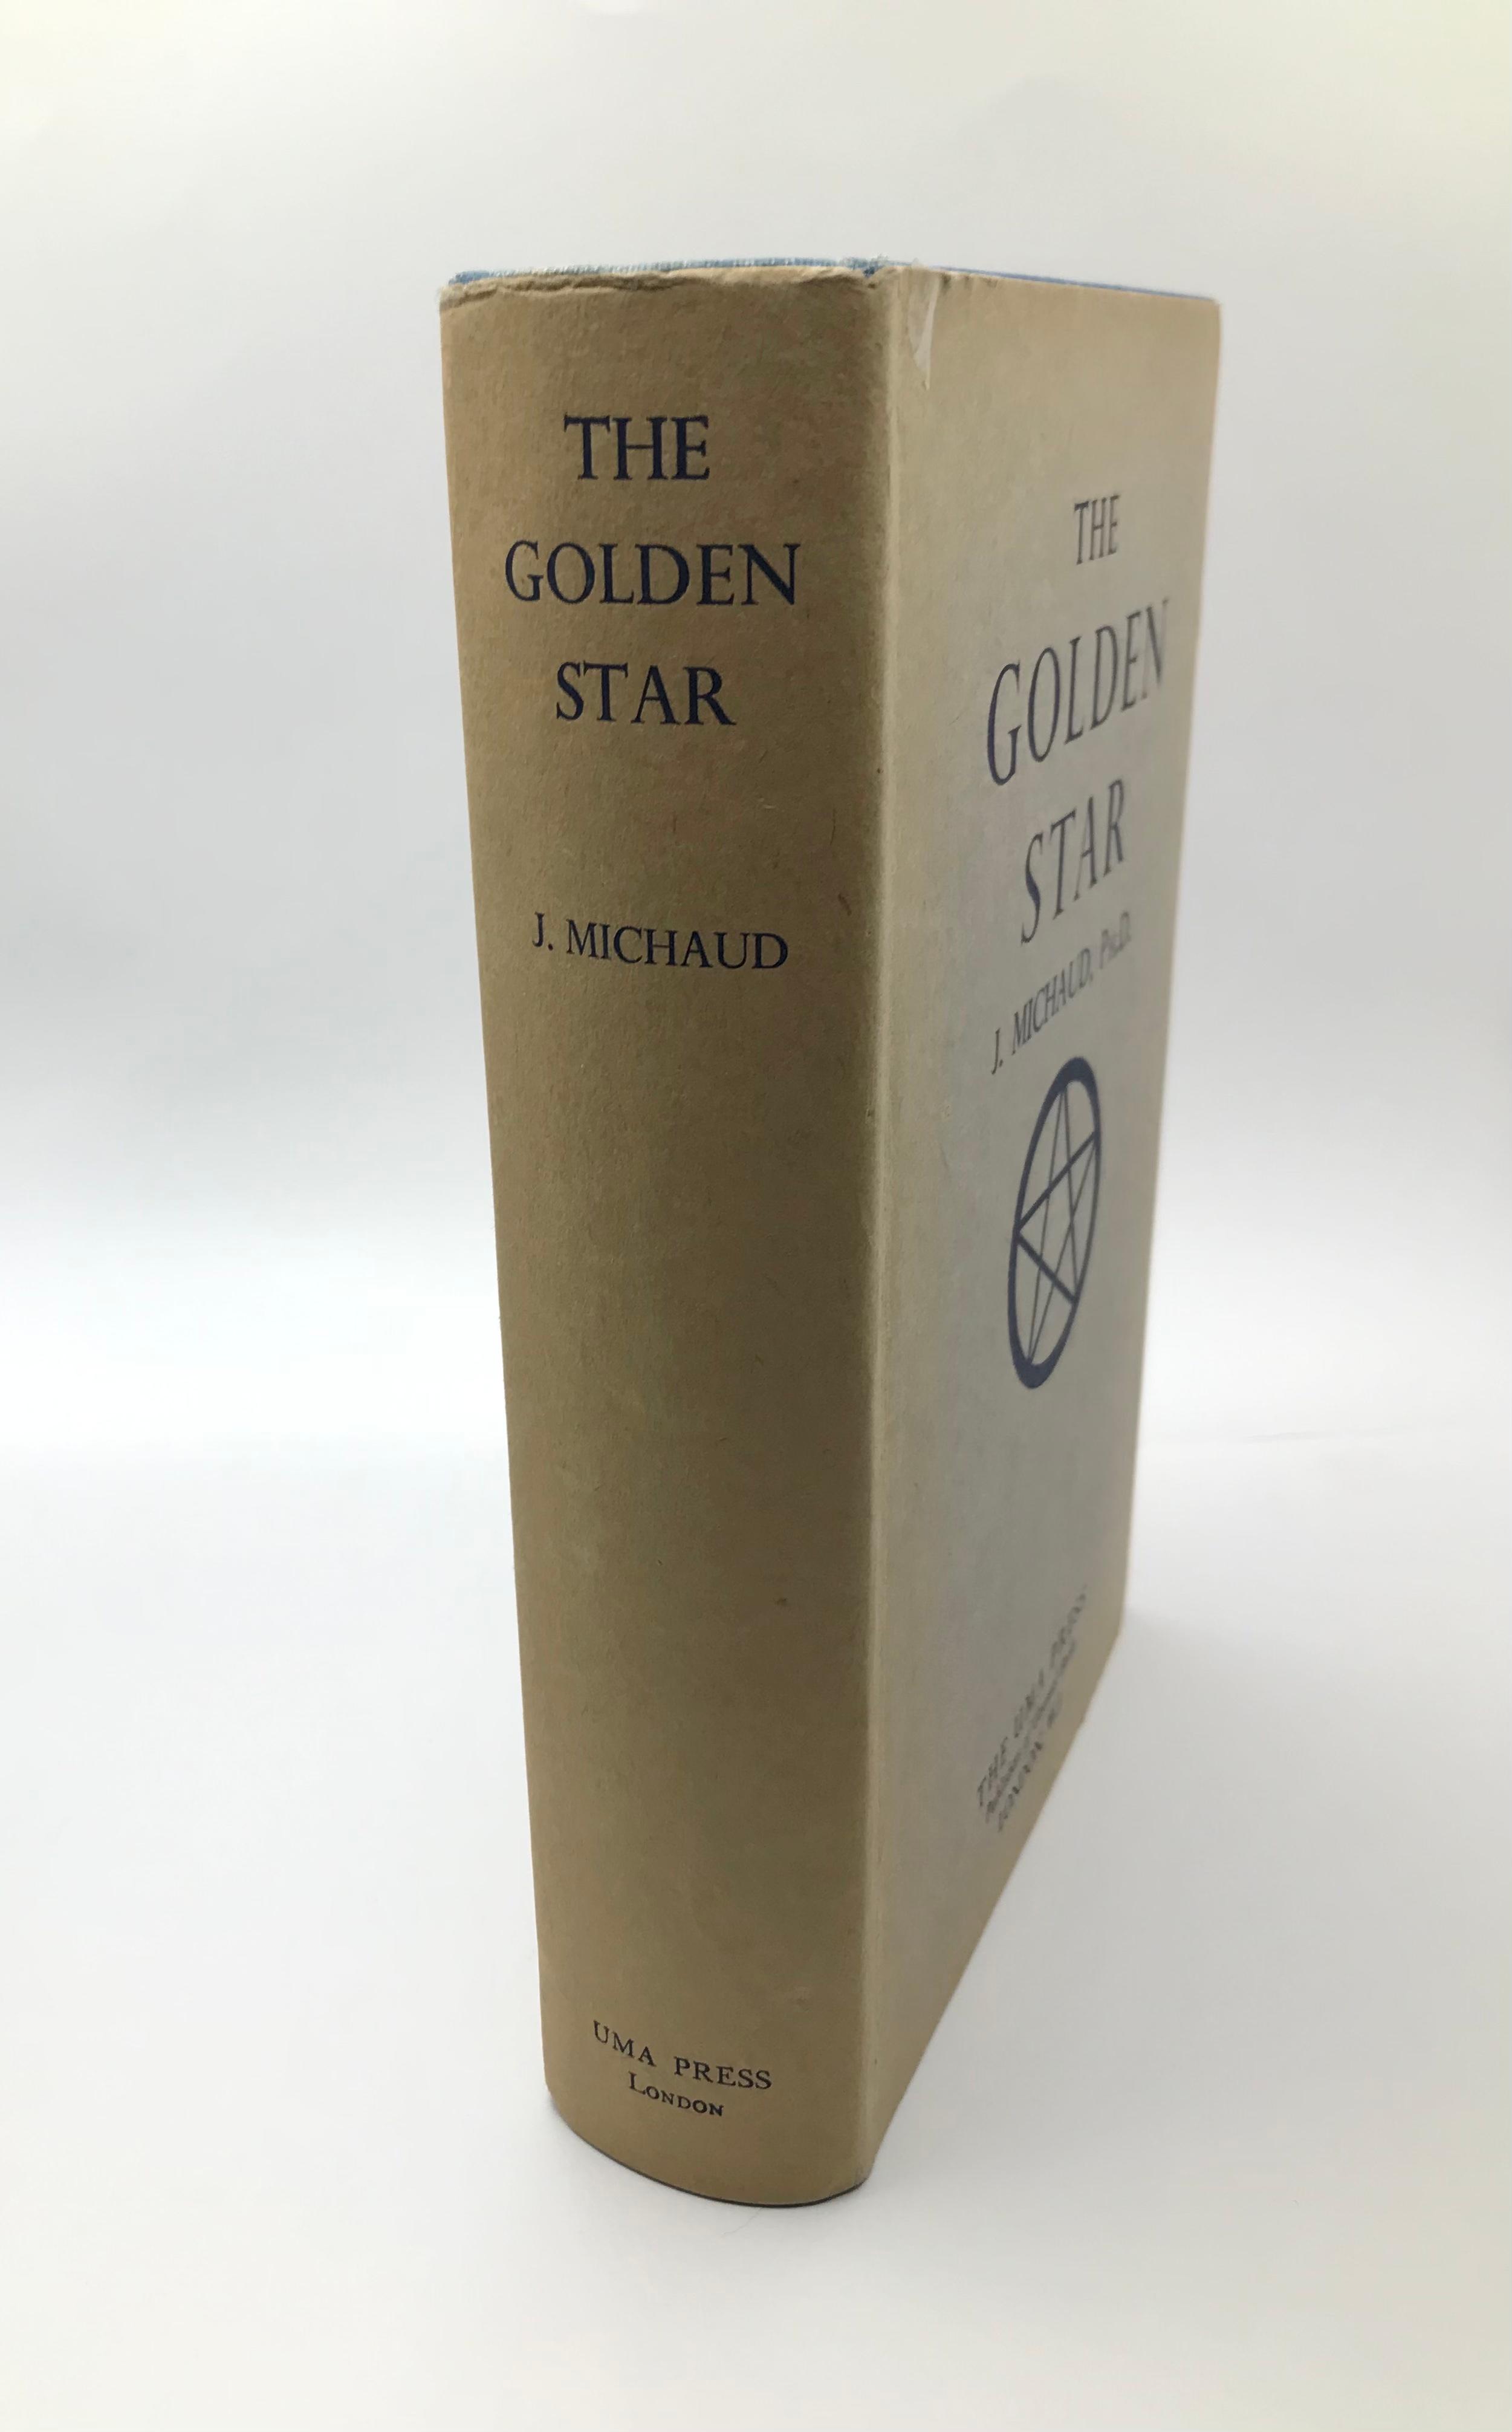 The Golden Star by J. Michaud